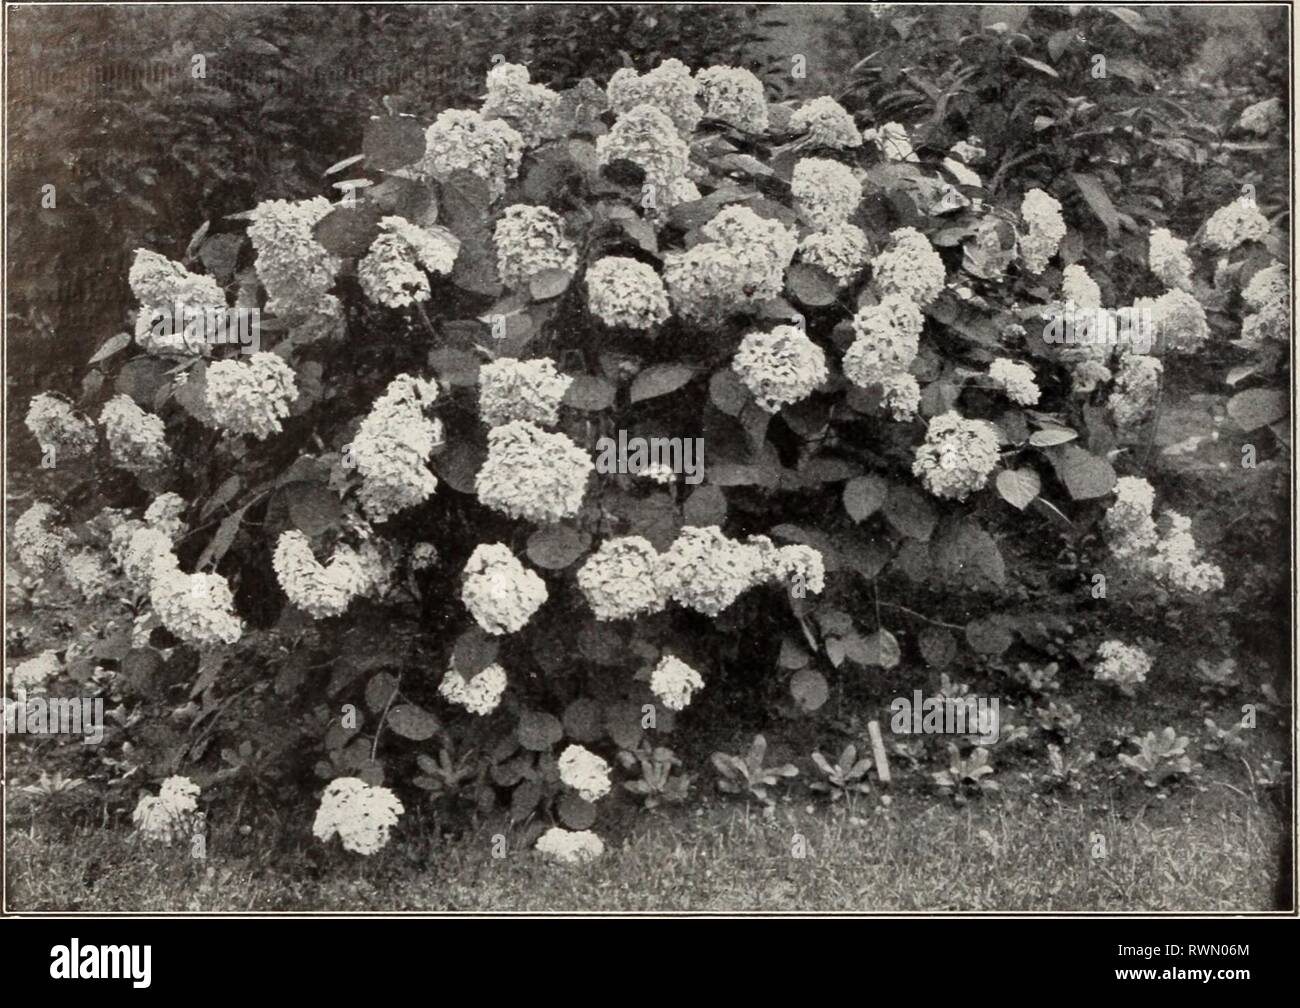 Ellwanger & Barry Mt Hope Ellwanger & Barry Mt Hope Nurseries 1916 ellwangerbarrymt1916moun Year: 1916  SNOWBALL HYDRANGEA HALESIA. Snowdrop or Silver BeU Tree H. tetraptera. C. A beautiful large shrub, with pretty white, bell-shaped flowers in May. One of the most desirable shrubs. 2 to 3 ft., 50c each. HAMAMELIS. Witch Hazel H. Virginica. D. A tall shrub; yellow flowers, late in autumn just before the leaves fall. 2 ft., 50c each. HIBISCUS. Althaea, or Rose of Sharon The Althaeas are fine, free-growing, flowering shrubs, of the easiest cultivation. Very desirable on account of blooming in Au Stock Photo